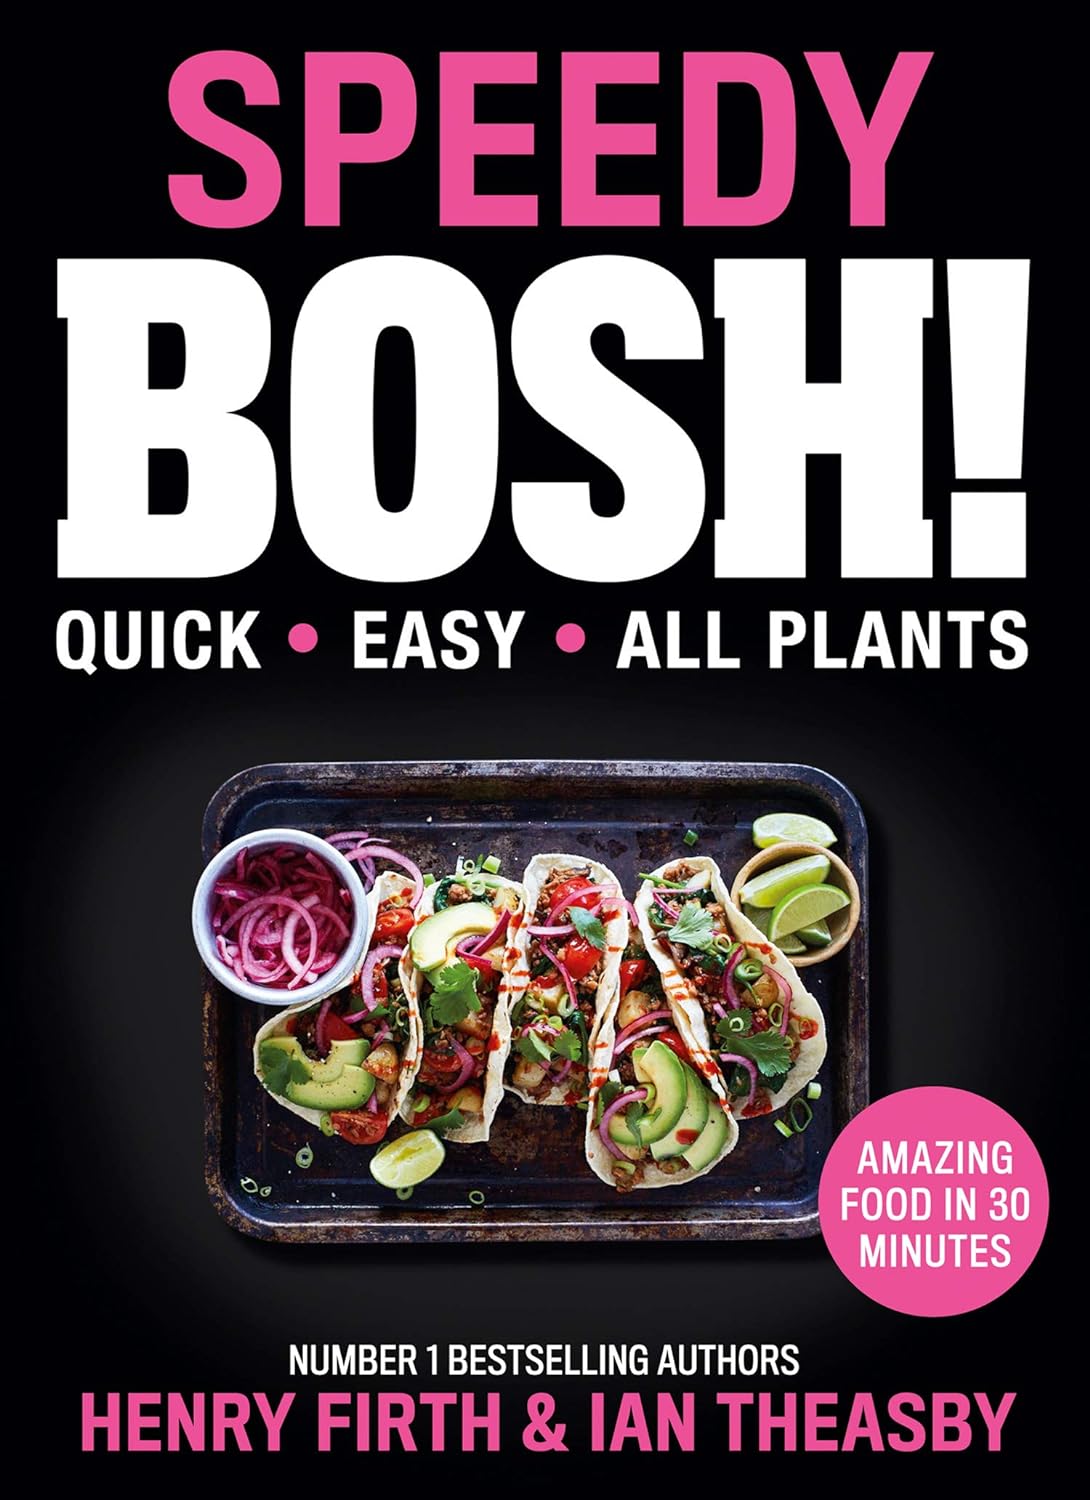 Speedy BOSH!: Over 100 New Quick and Easy Plant-Based Meals in 30 Minutes from the Authors of the Highest Selling Vegan Cookbook Ever     Kindle Edition